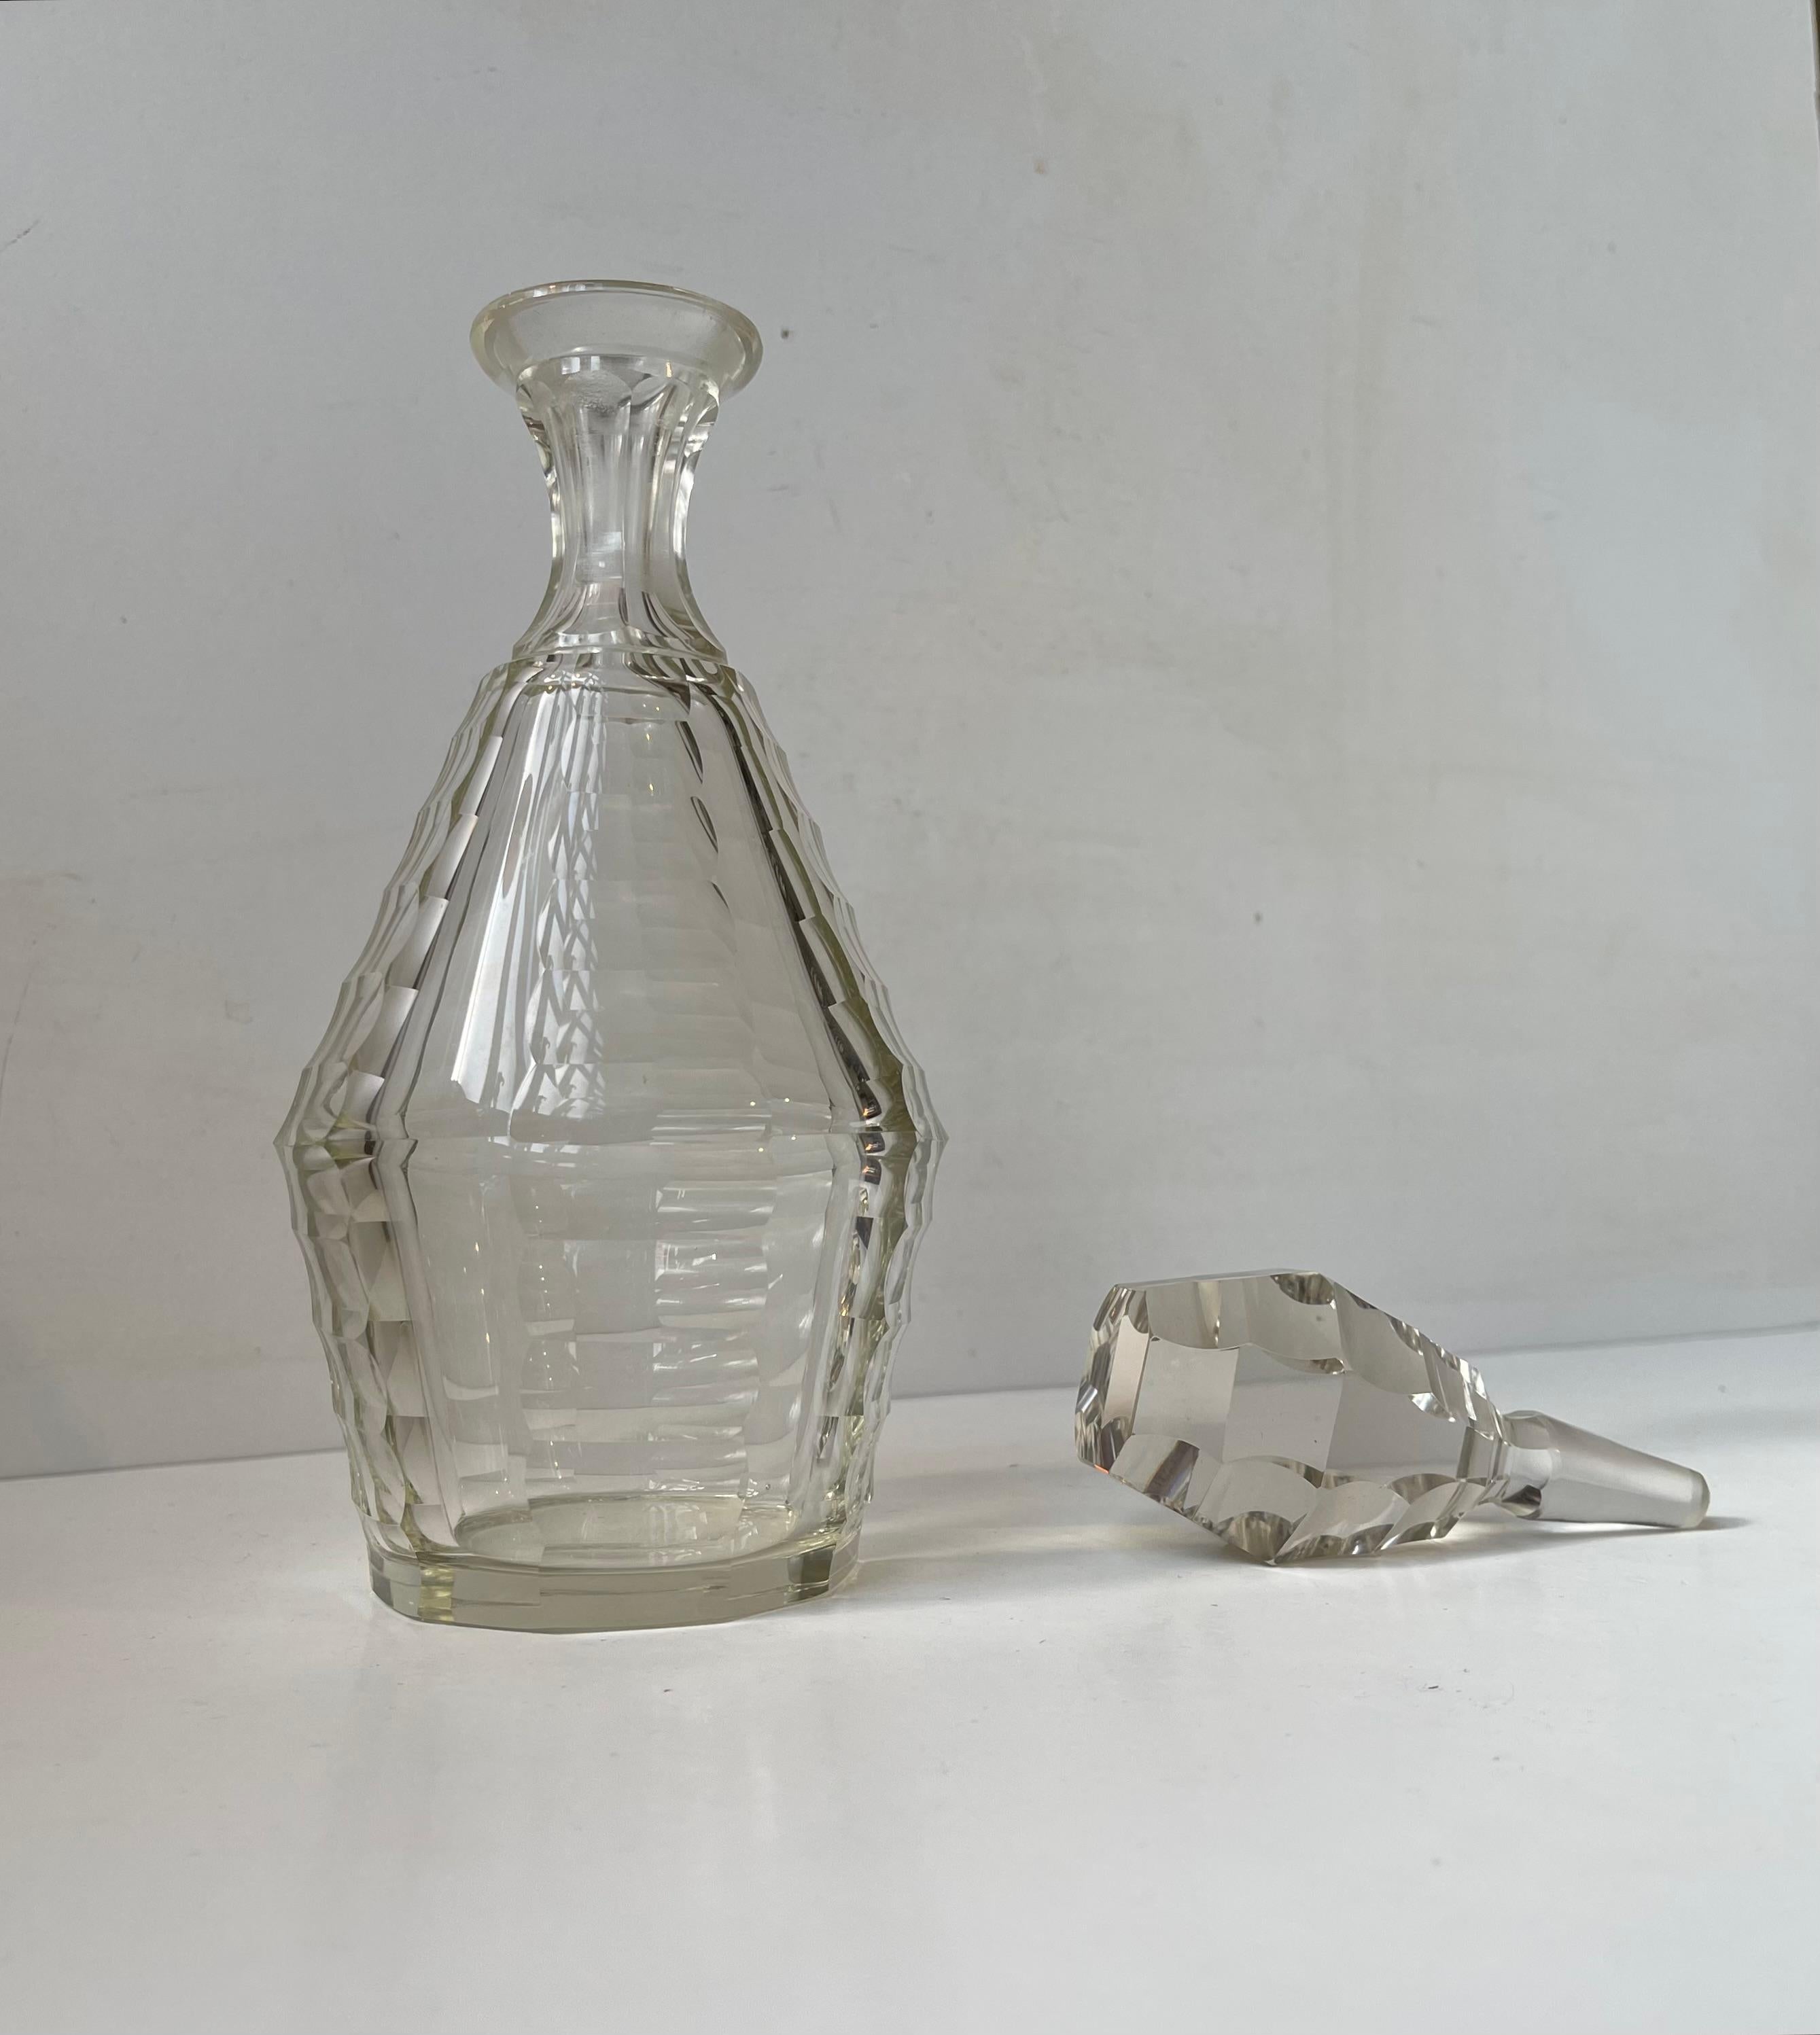 Beveled Baccarat France Art Deco Decanter in Faceted Crystal, 1930s For Sale